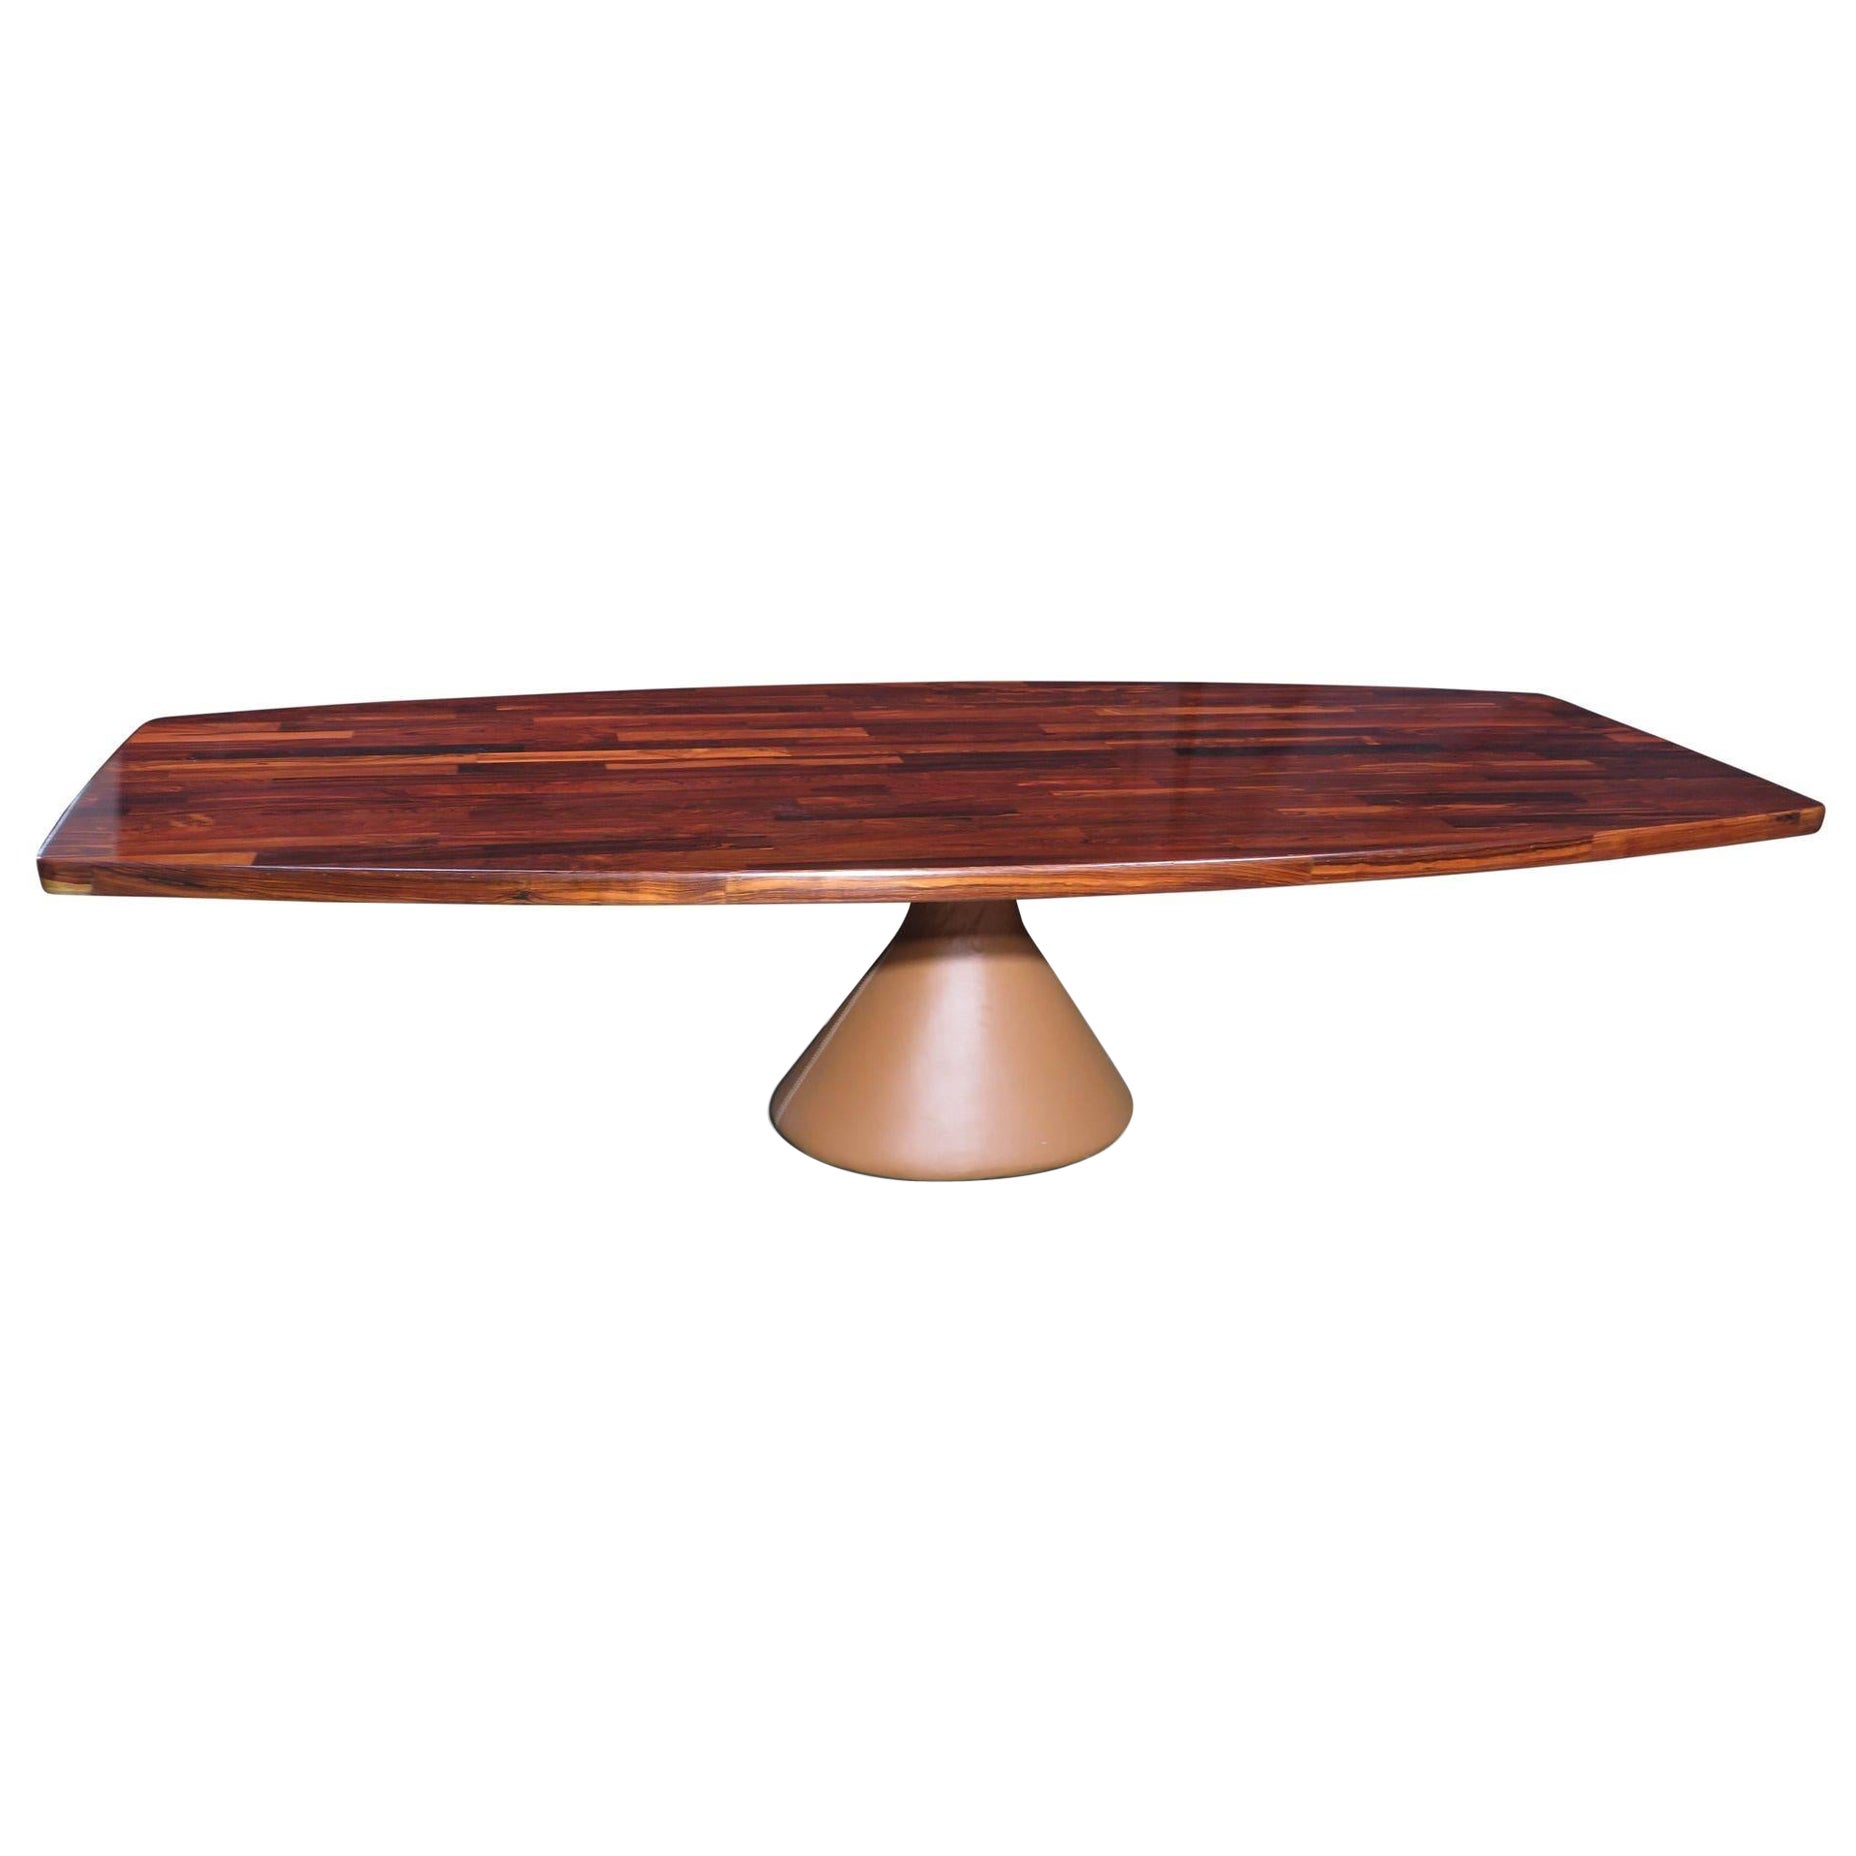 Jorge Zalszupin L'atelier Guanabara Rosewood Dining or Conference Pedestal Table For Sale